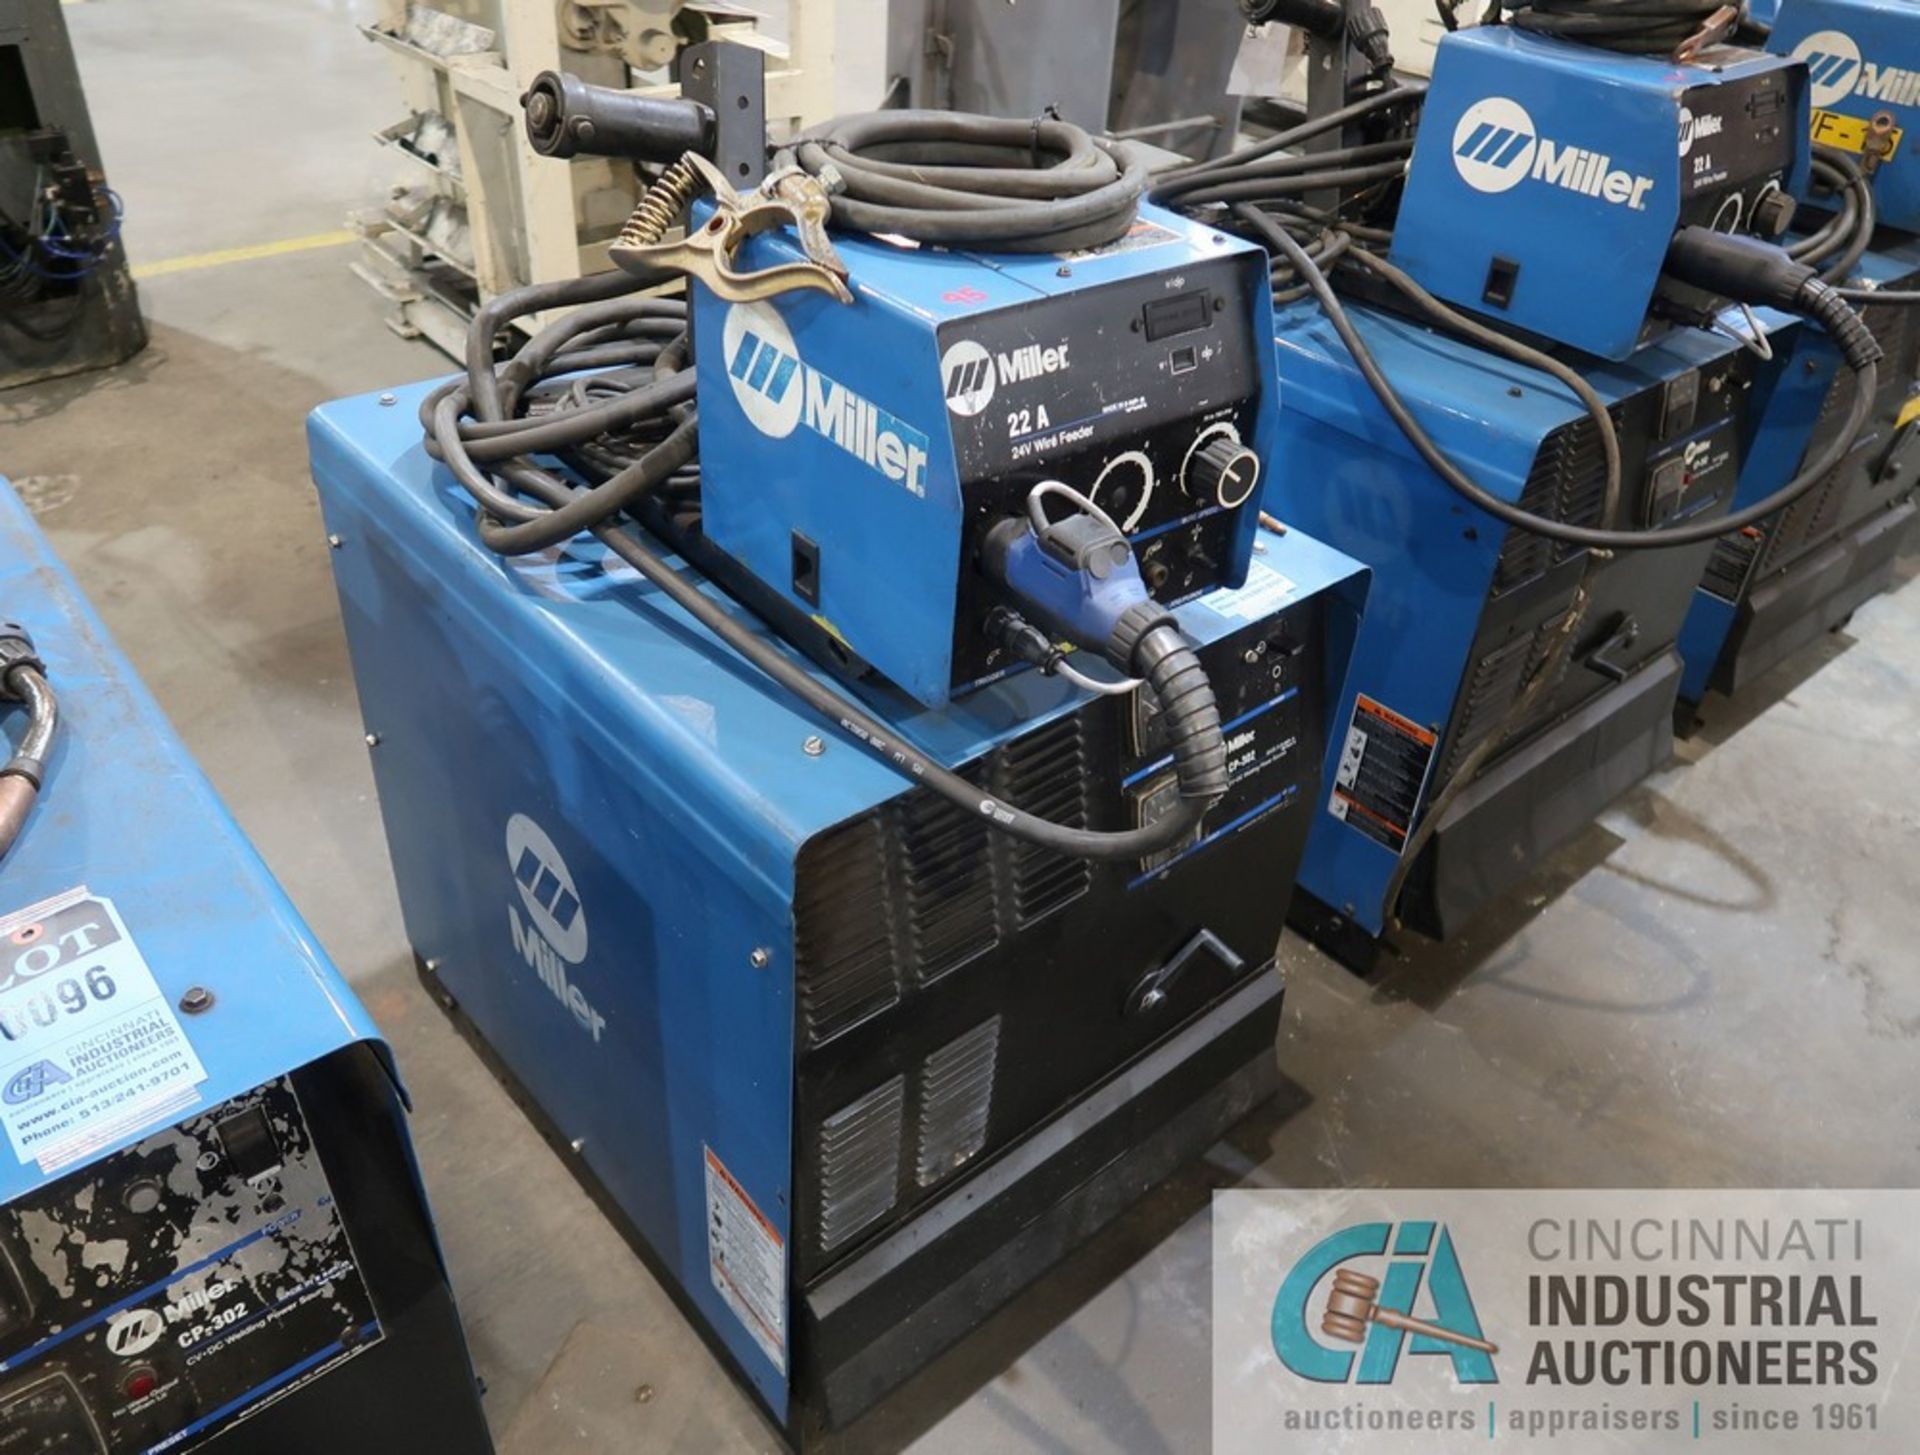 300 AMP MILLER CP-302 CV-DC WELDING POWER SOURCE; S/N LB330866, WITH MILLER 22A 24 VOLT WIRE FEEDER - Image 2 of 5